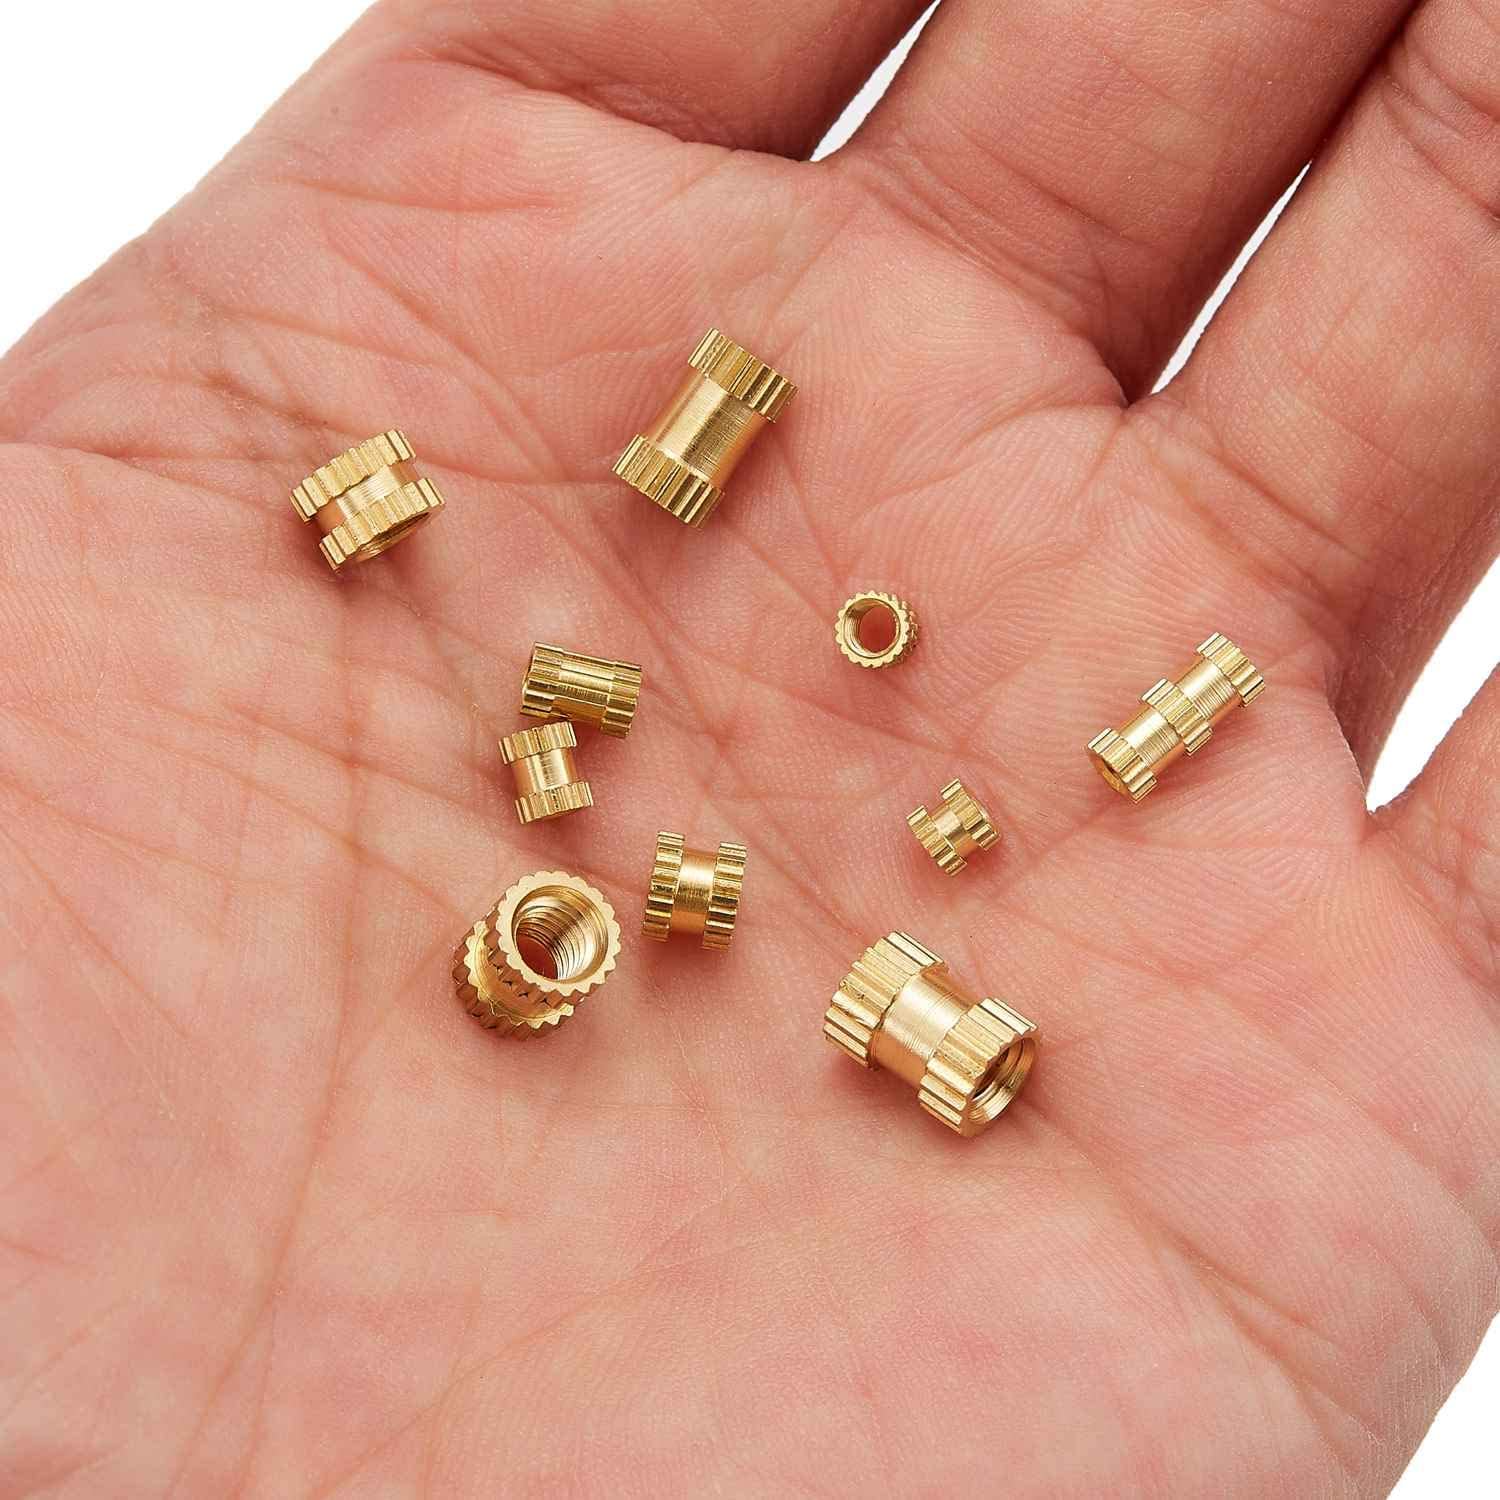 M4 Brass Heat Set Threaded Insert for Plastic Kit with Tool